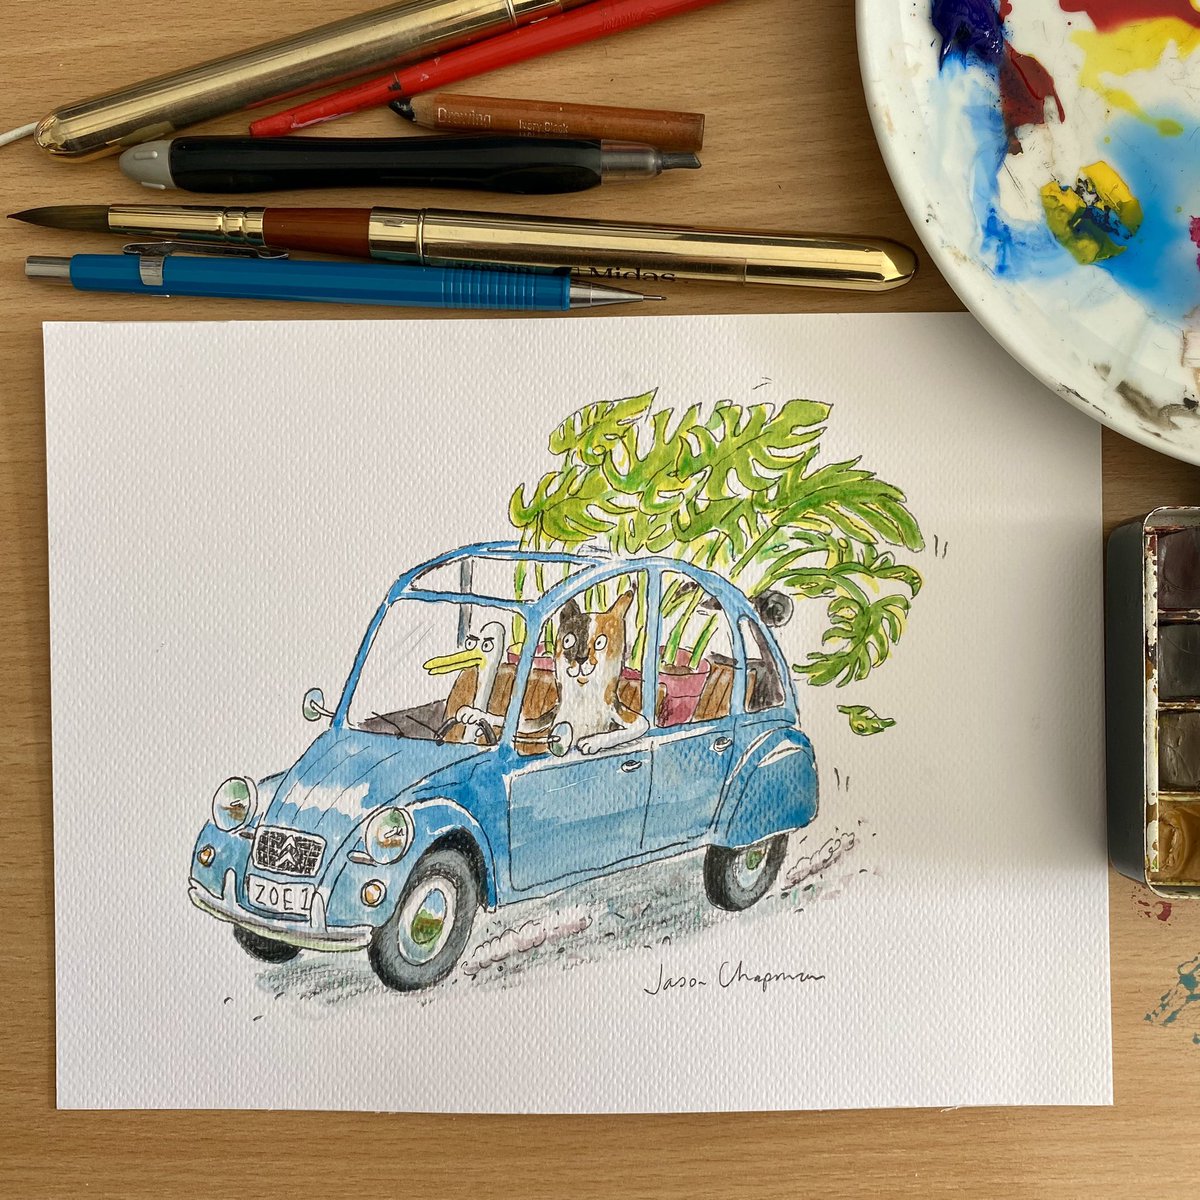 Going home gift for our lovely French exchange student who stayed with us this week. Her cat and a duck in a 2CV #kidlitart #illustration #caturday #illustrationjeunesse #cat #catlover #catlife #catillustration #duck #ducklife #duckillustration #citroen #2cv #citroen2cv6 #france